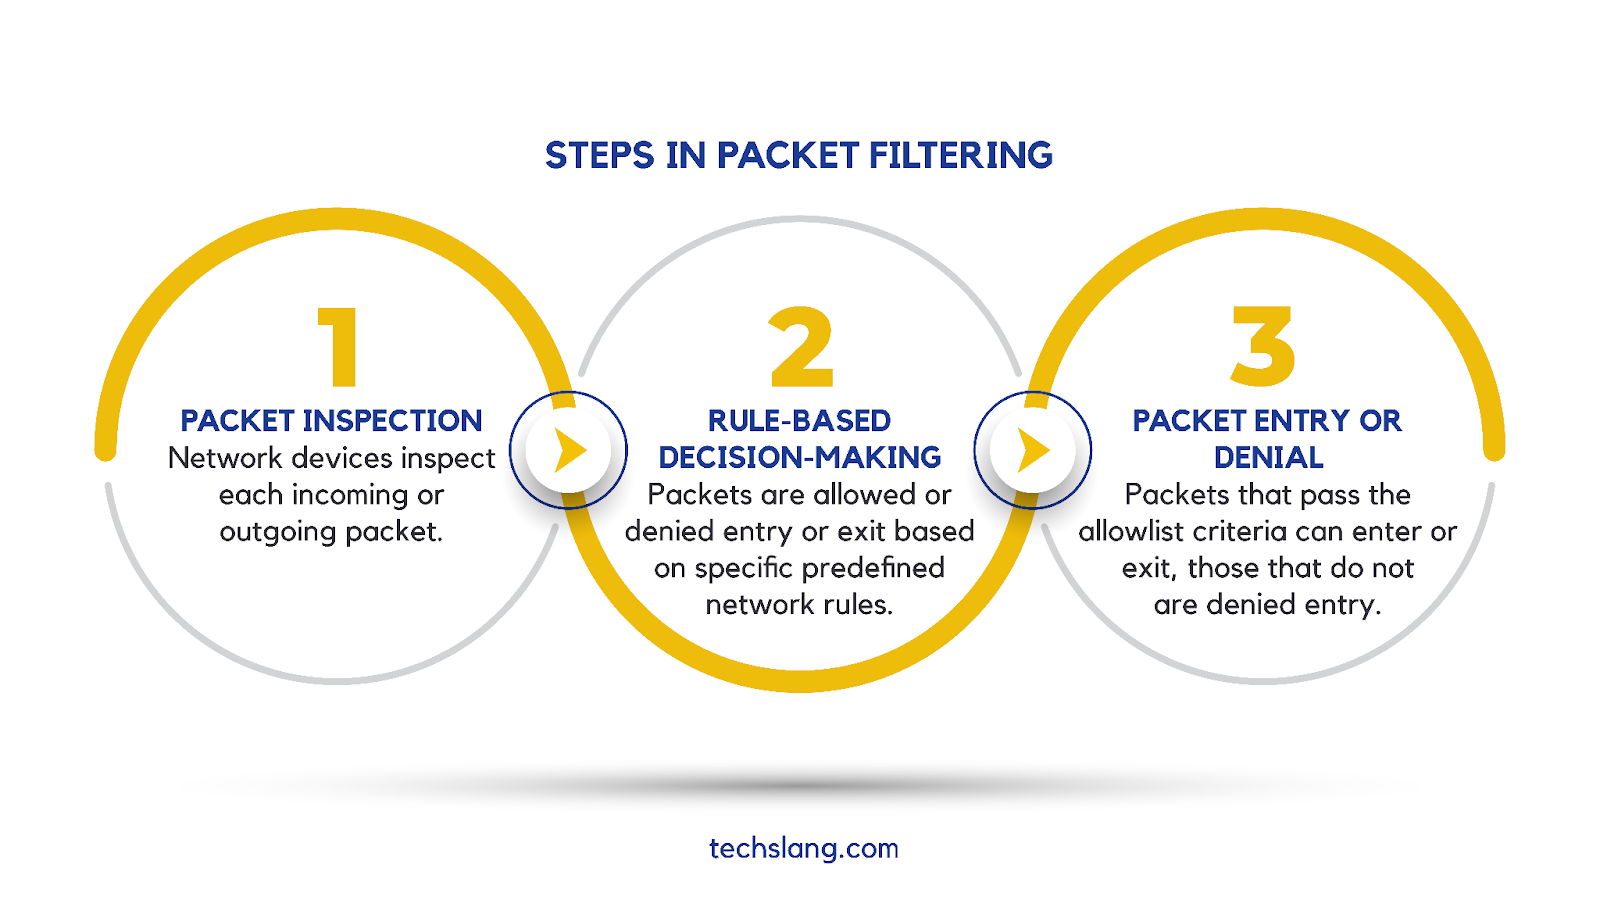 Steps in Packet Filtering